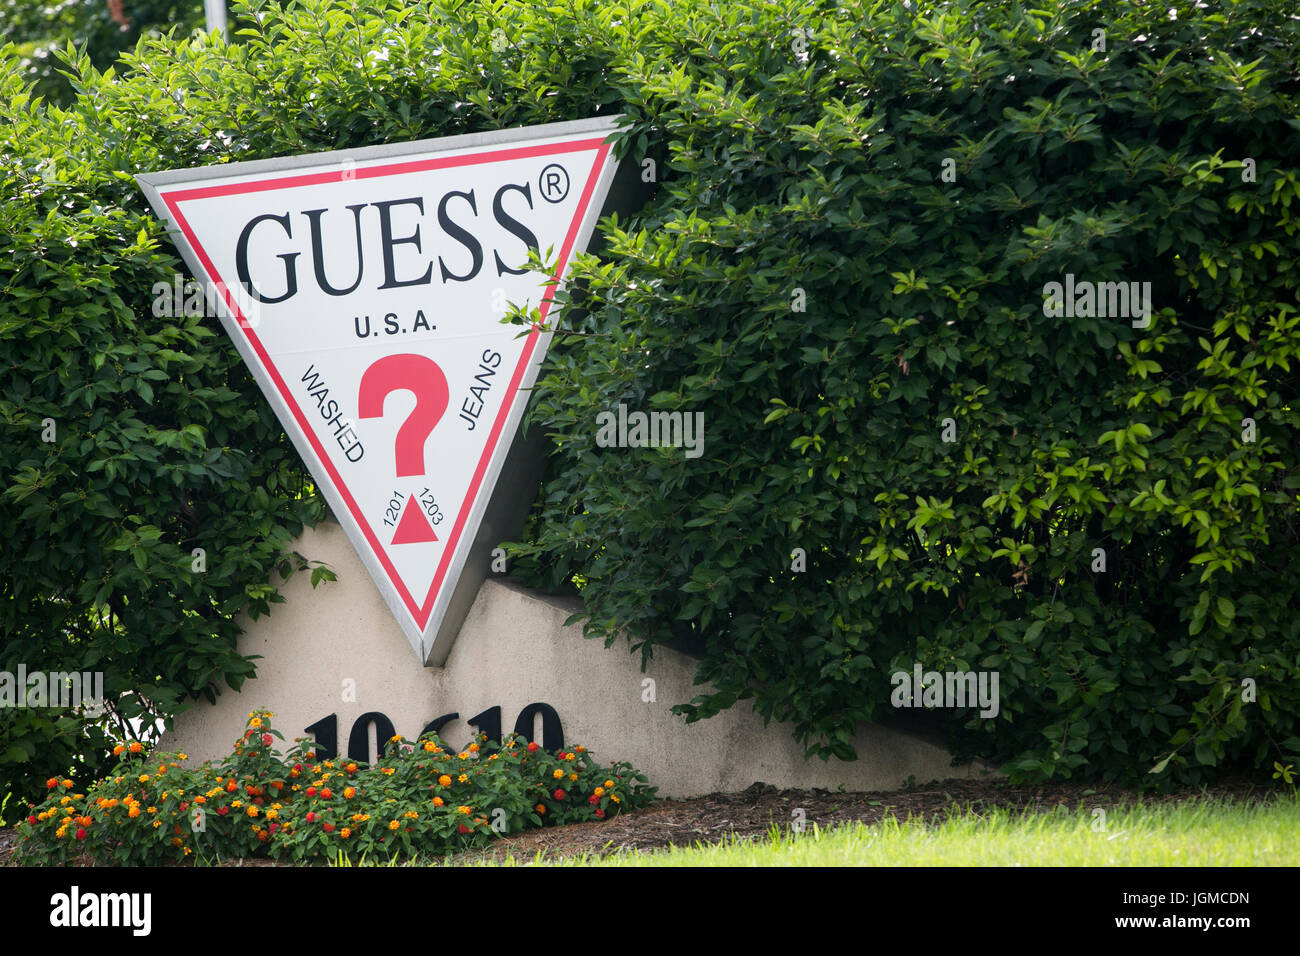 Macadam Opmuntring forsigtigt Page 2 - Guess Sign High Resolution Stock Photography and Images - Alamy